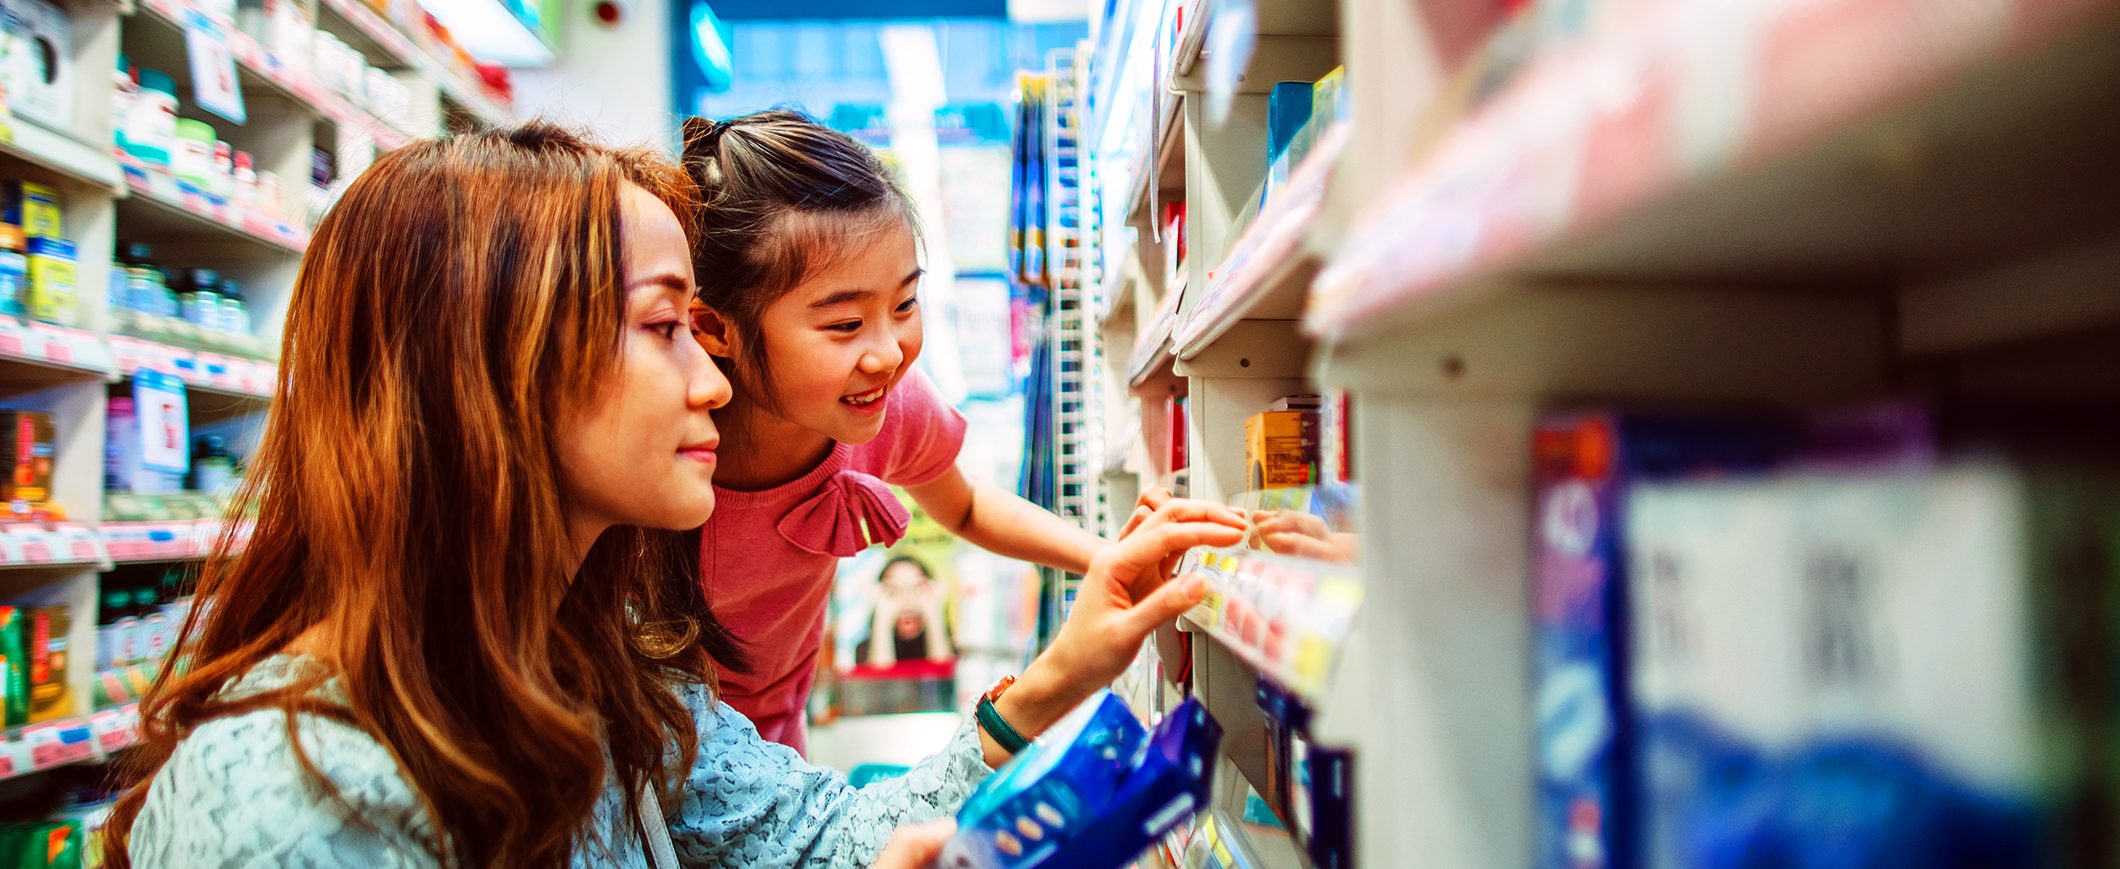 A mother and daughter shop in the grocery store.